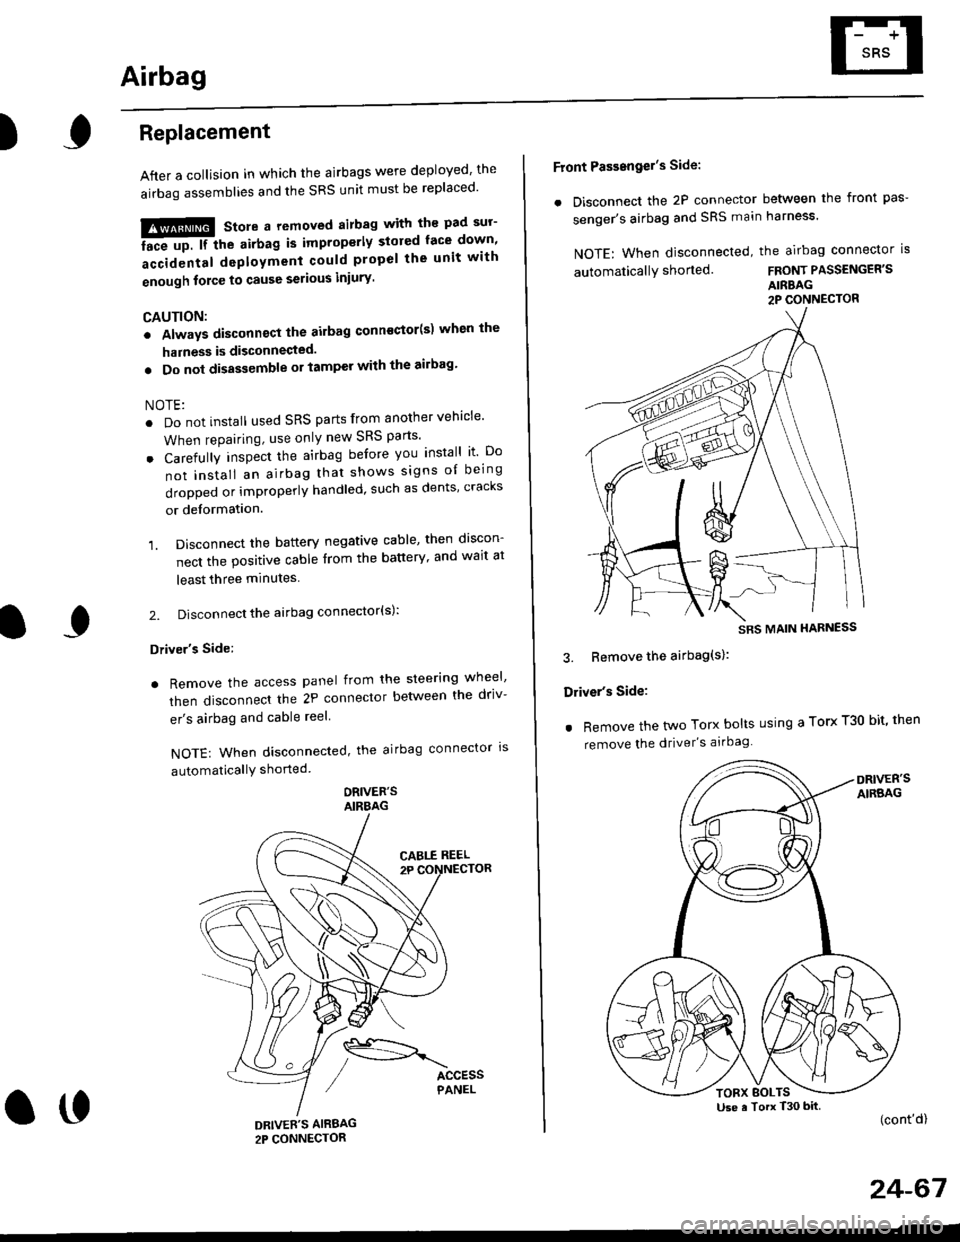 HONDA CIVIC 1996 6.G Repair Manual Airbag
)Replacement
After a collision in which the airbags were deployed the
airbag assemblies and the SRS unit must be replaced
!!!@ Store a removed airbag with the pad sur
iFup. rr trt" airbag is